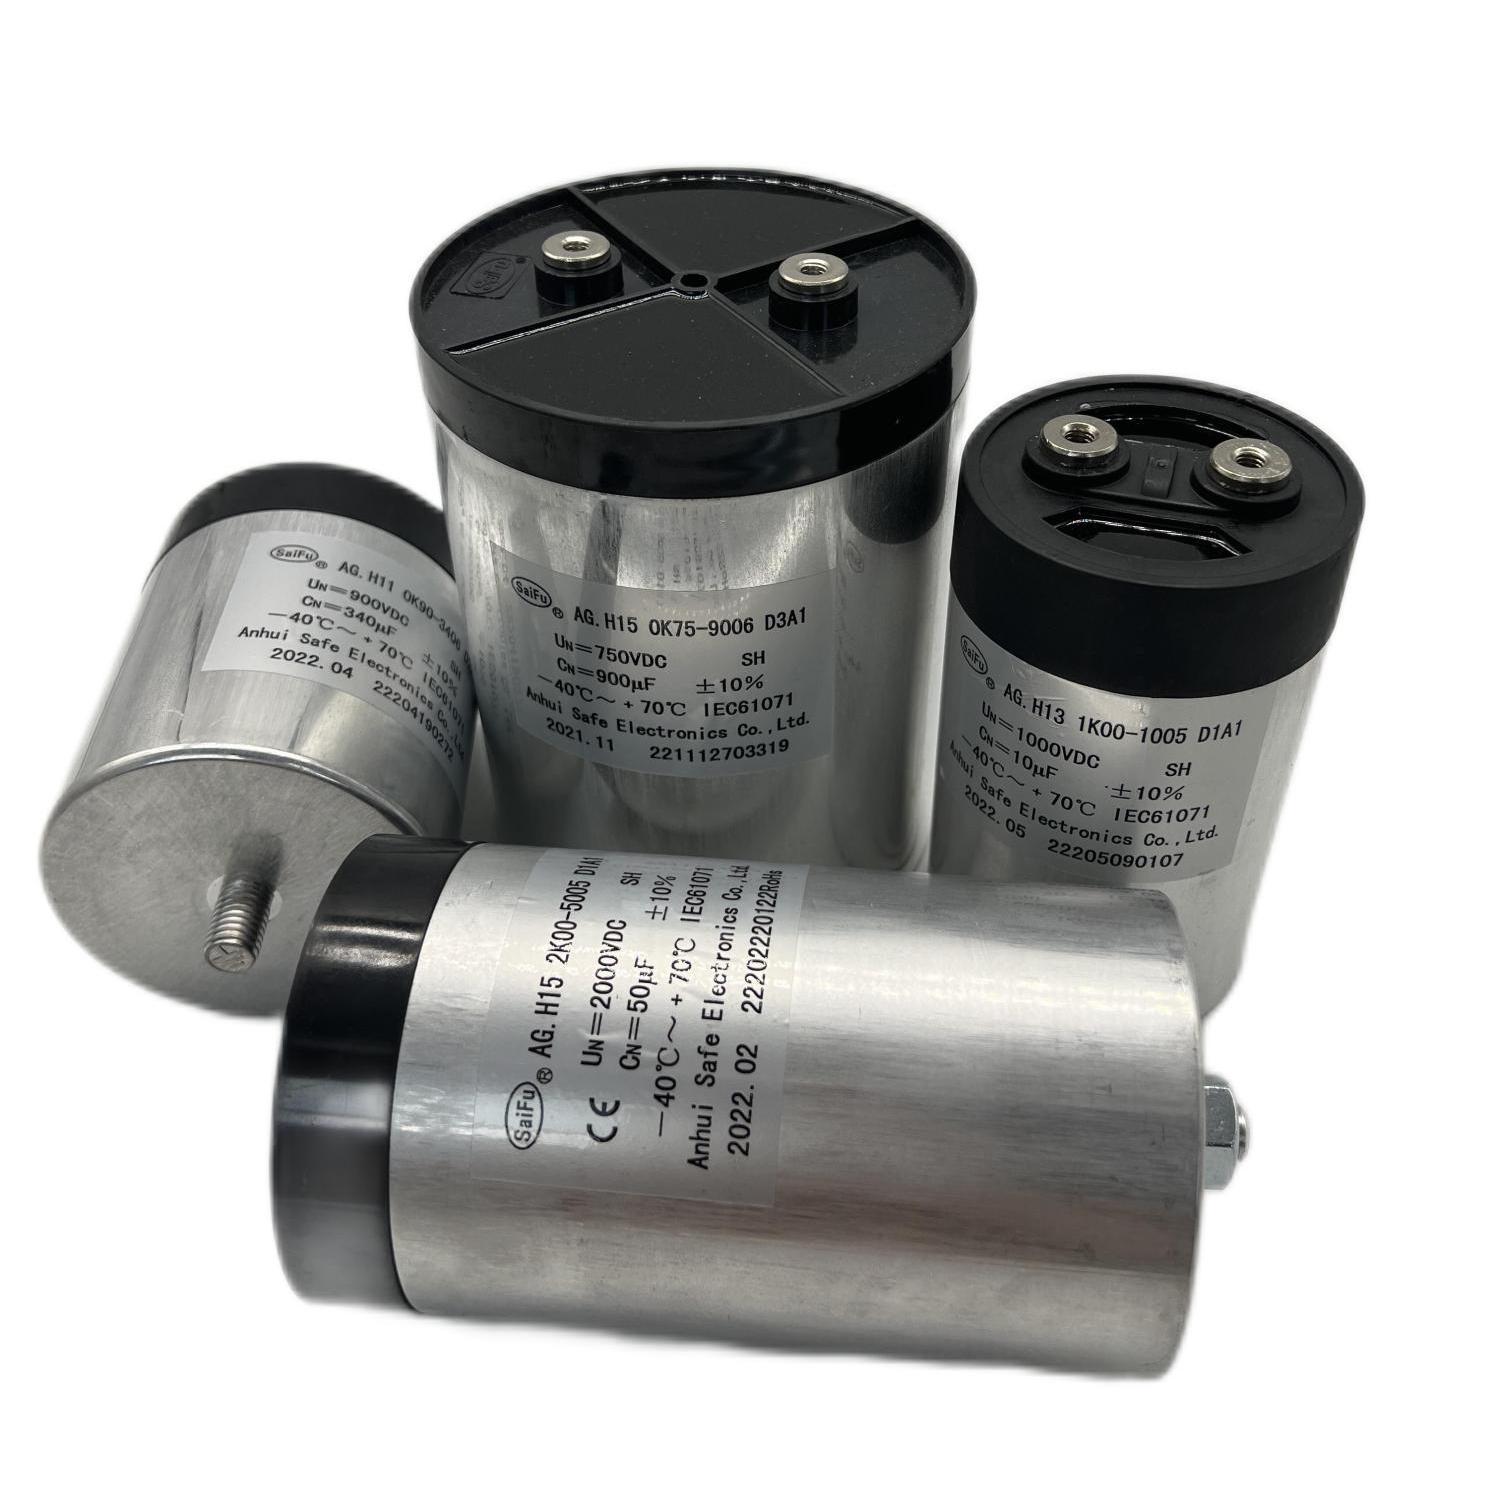 DC LINK Capacitor for Photovoltaic wind power cylinder 